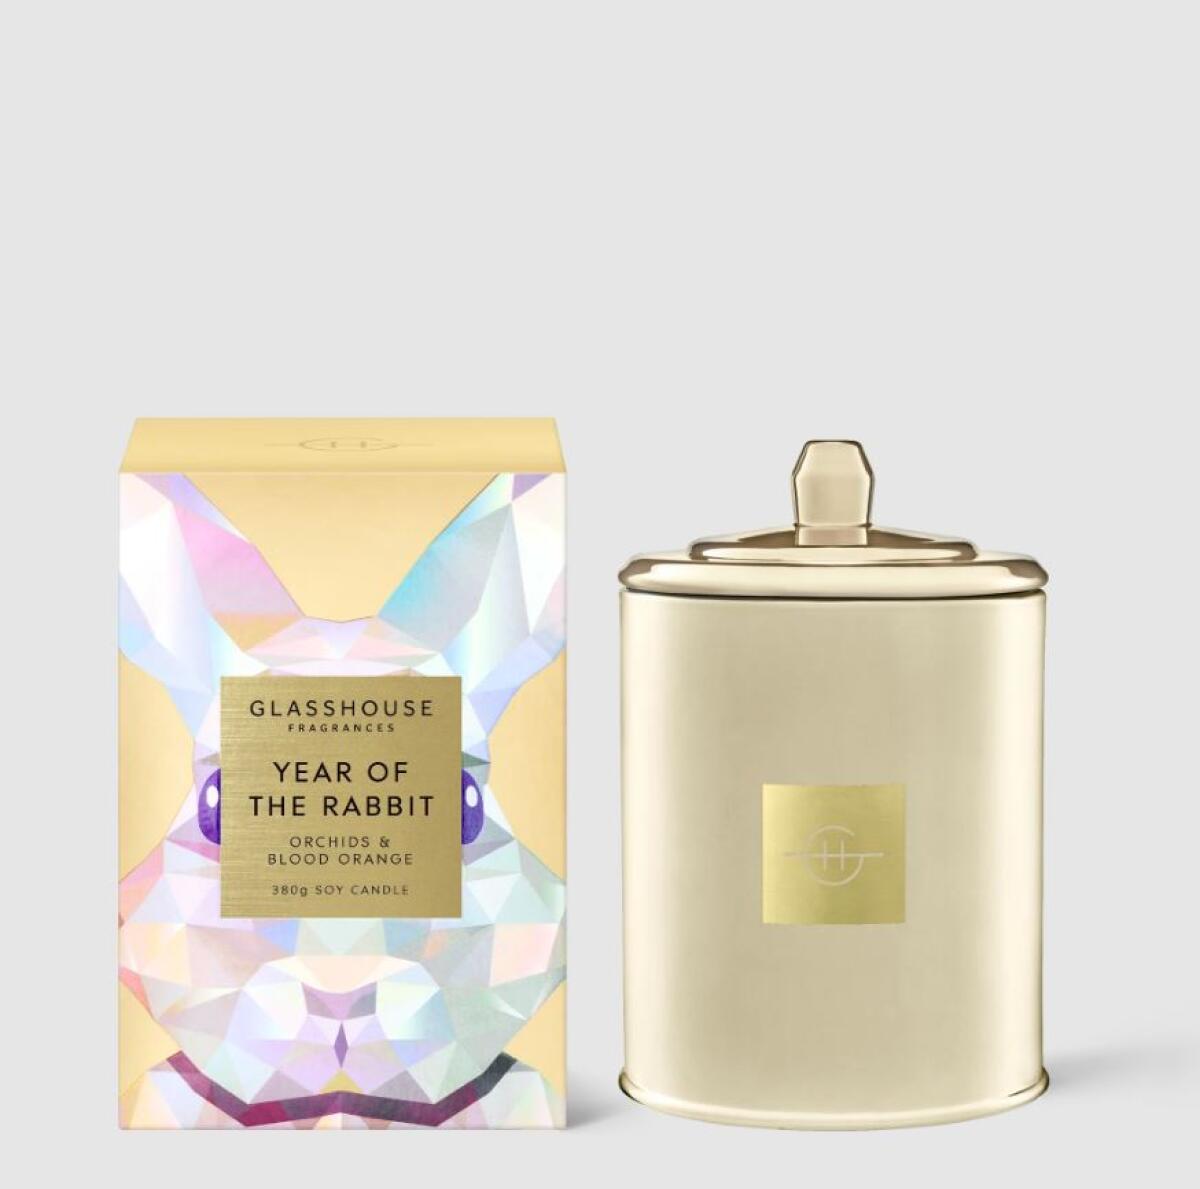 Glasshouse Fragrances limited-edition Year of the Rabbit candle next to its colorful box.